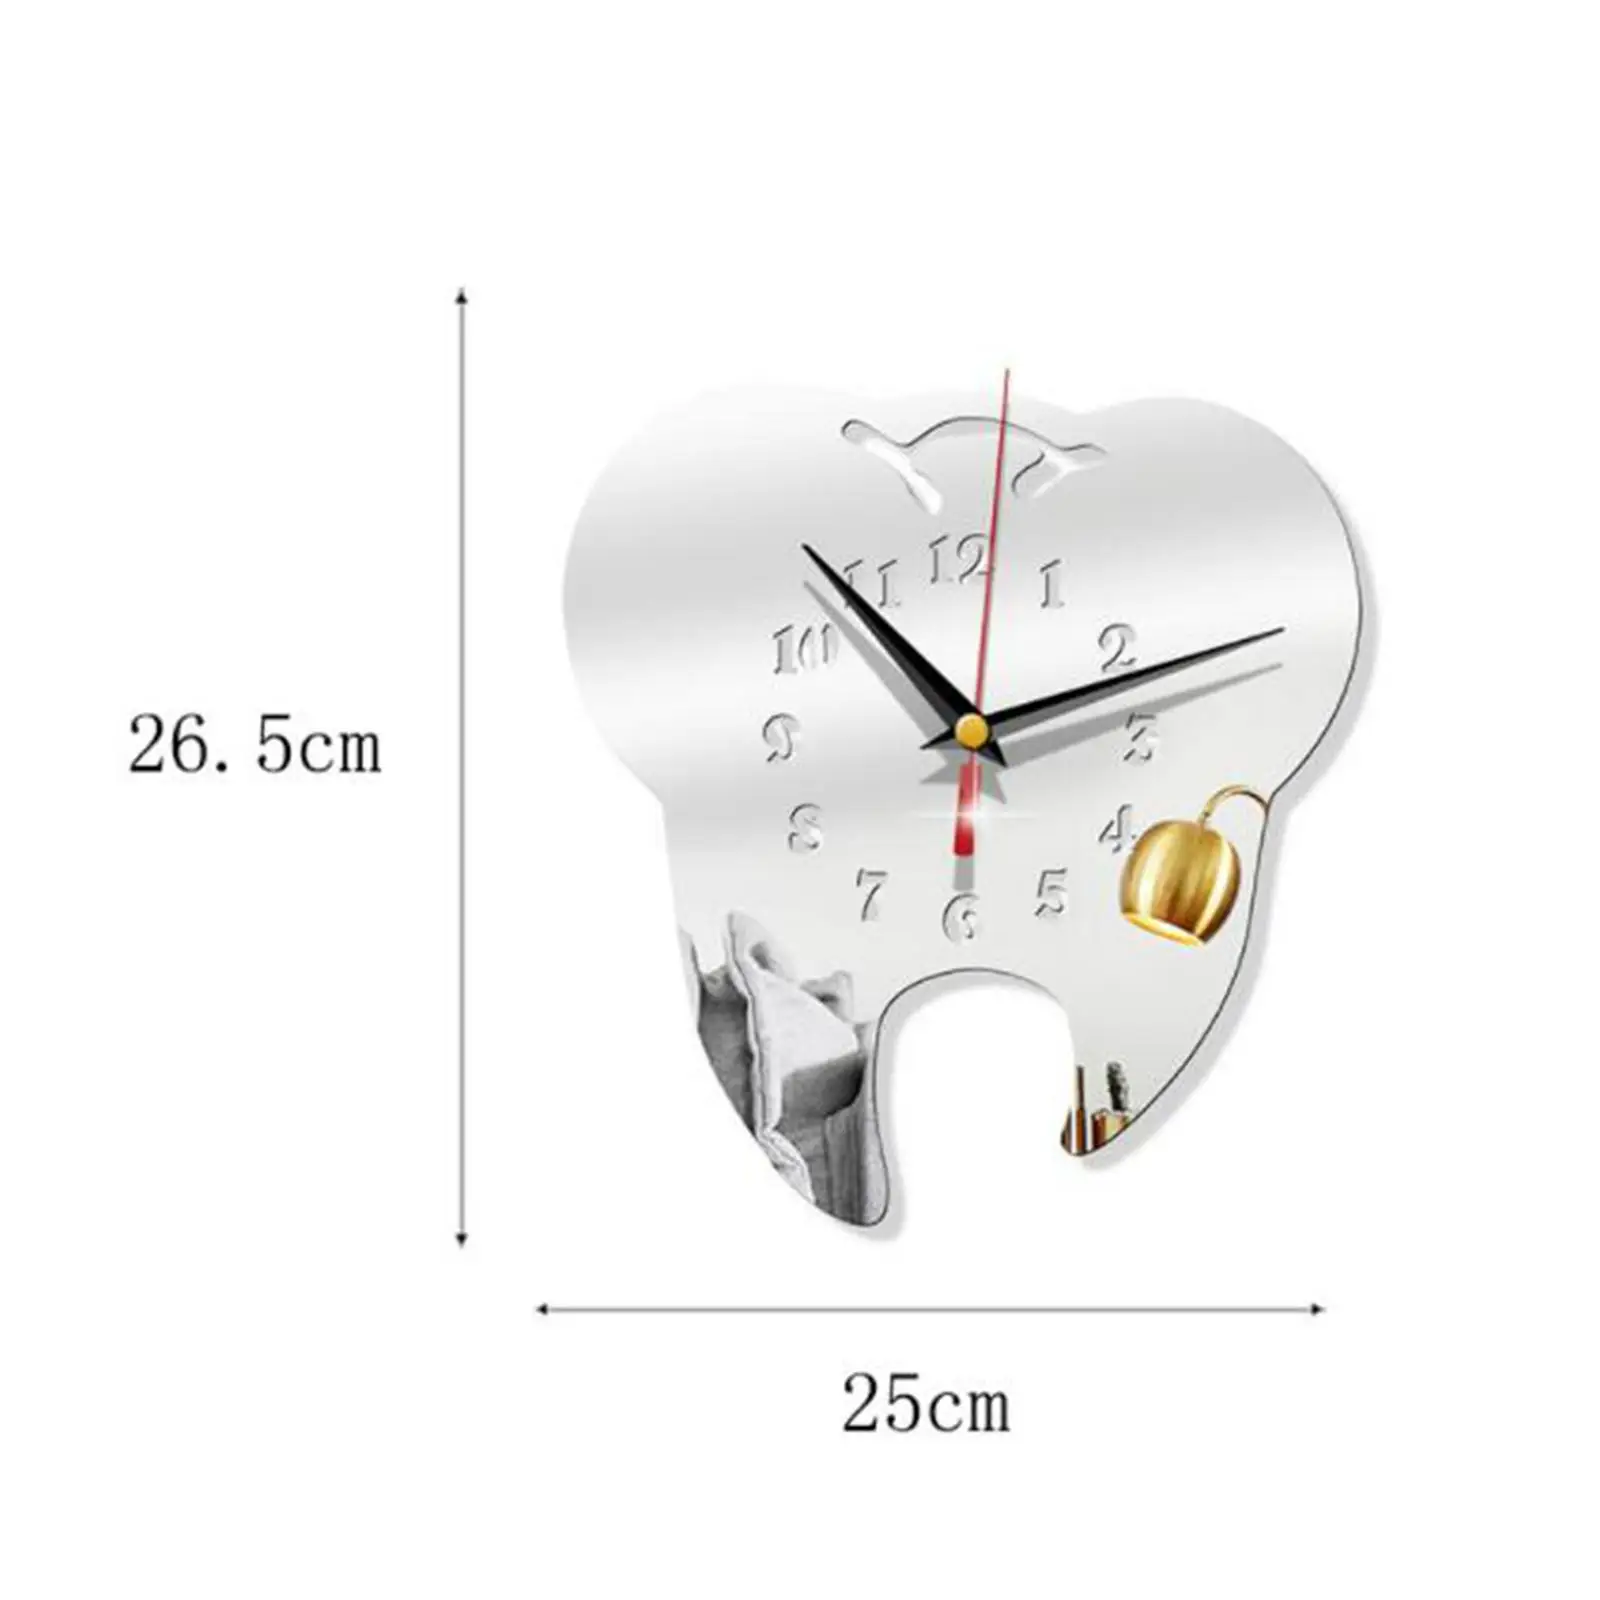 Acrylic Wall Clocks Clock Battery Operated Silent Shaped Mirrored Arabic Number for Decor Office Classroom Kitchen